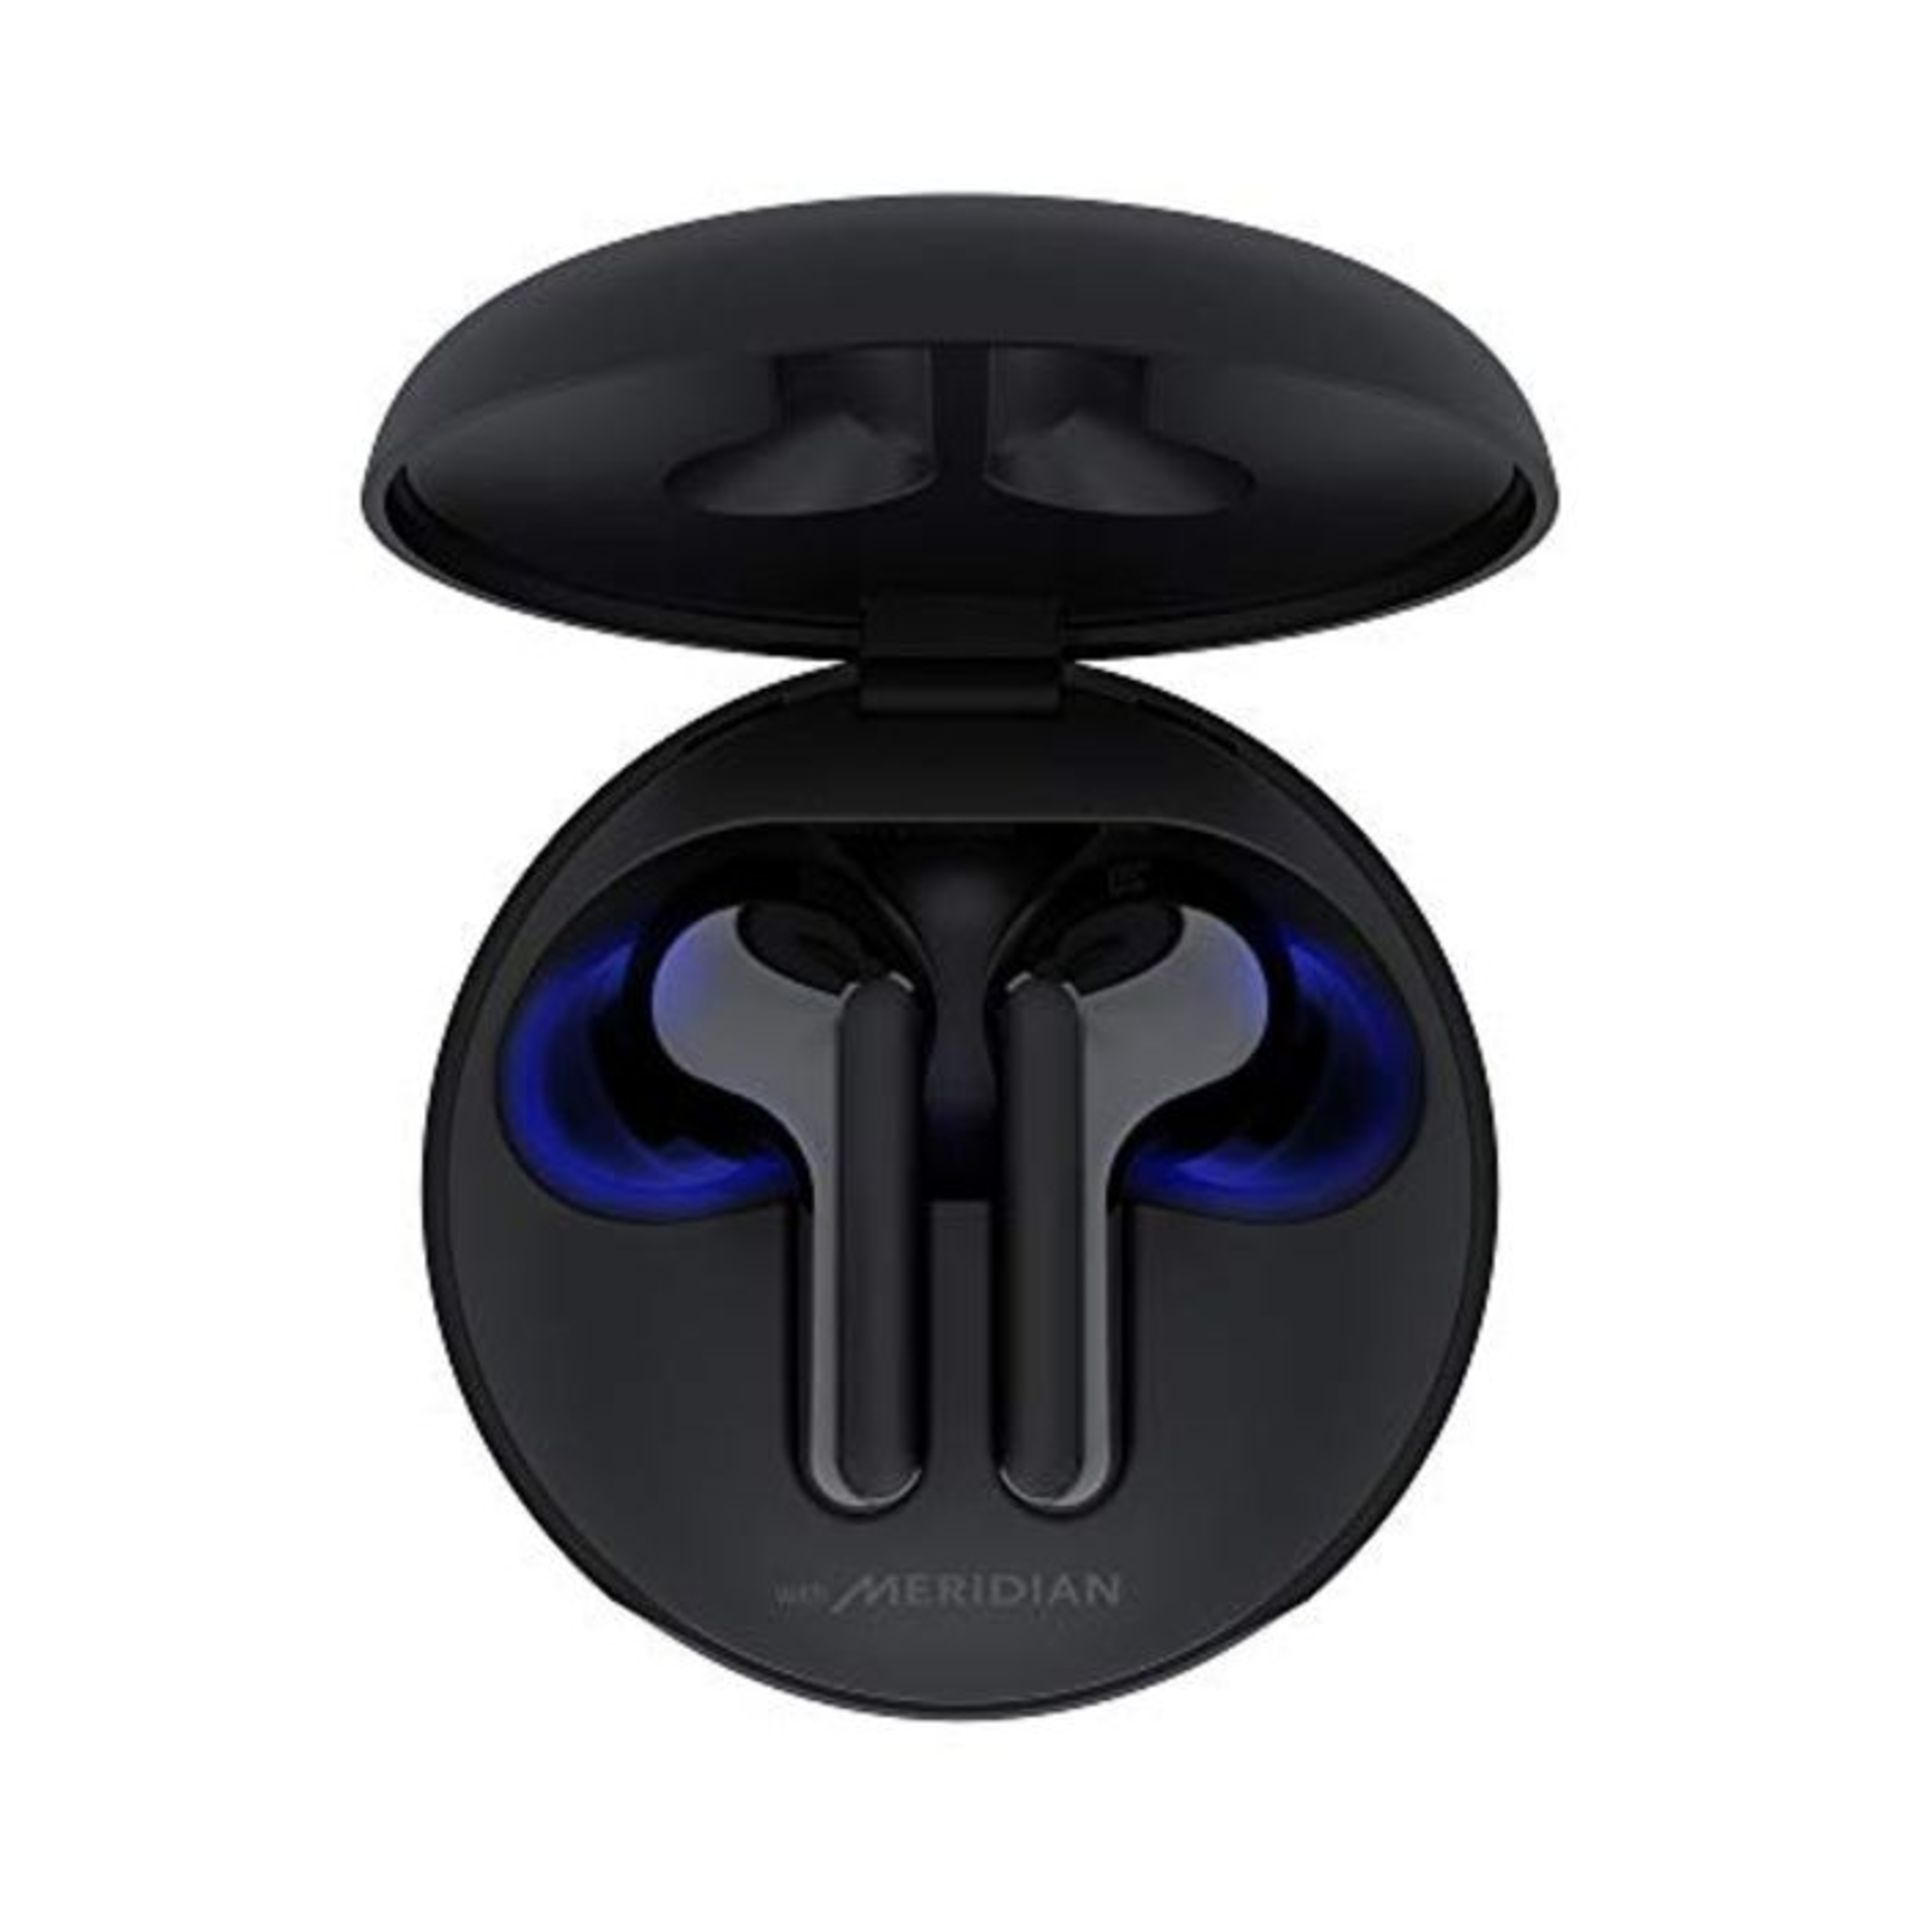 RRP £78.00 LG TONE Free FN6 True Wireless Bluetooth Earbuds with UVNano Wireless Charging Case, W